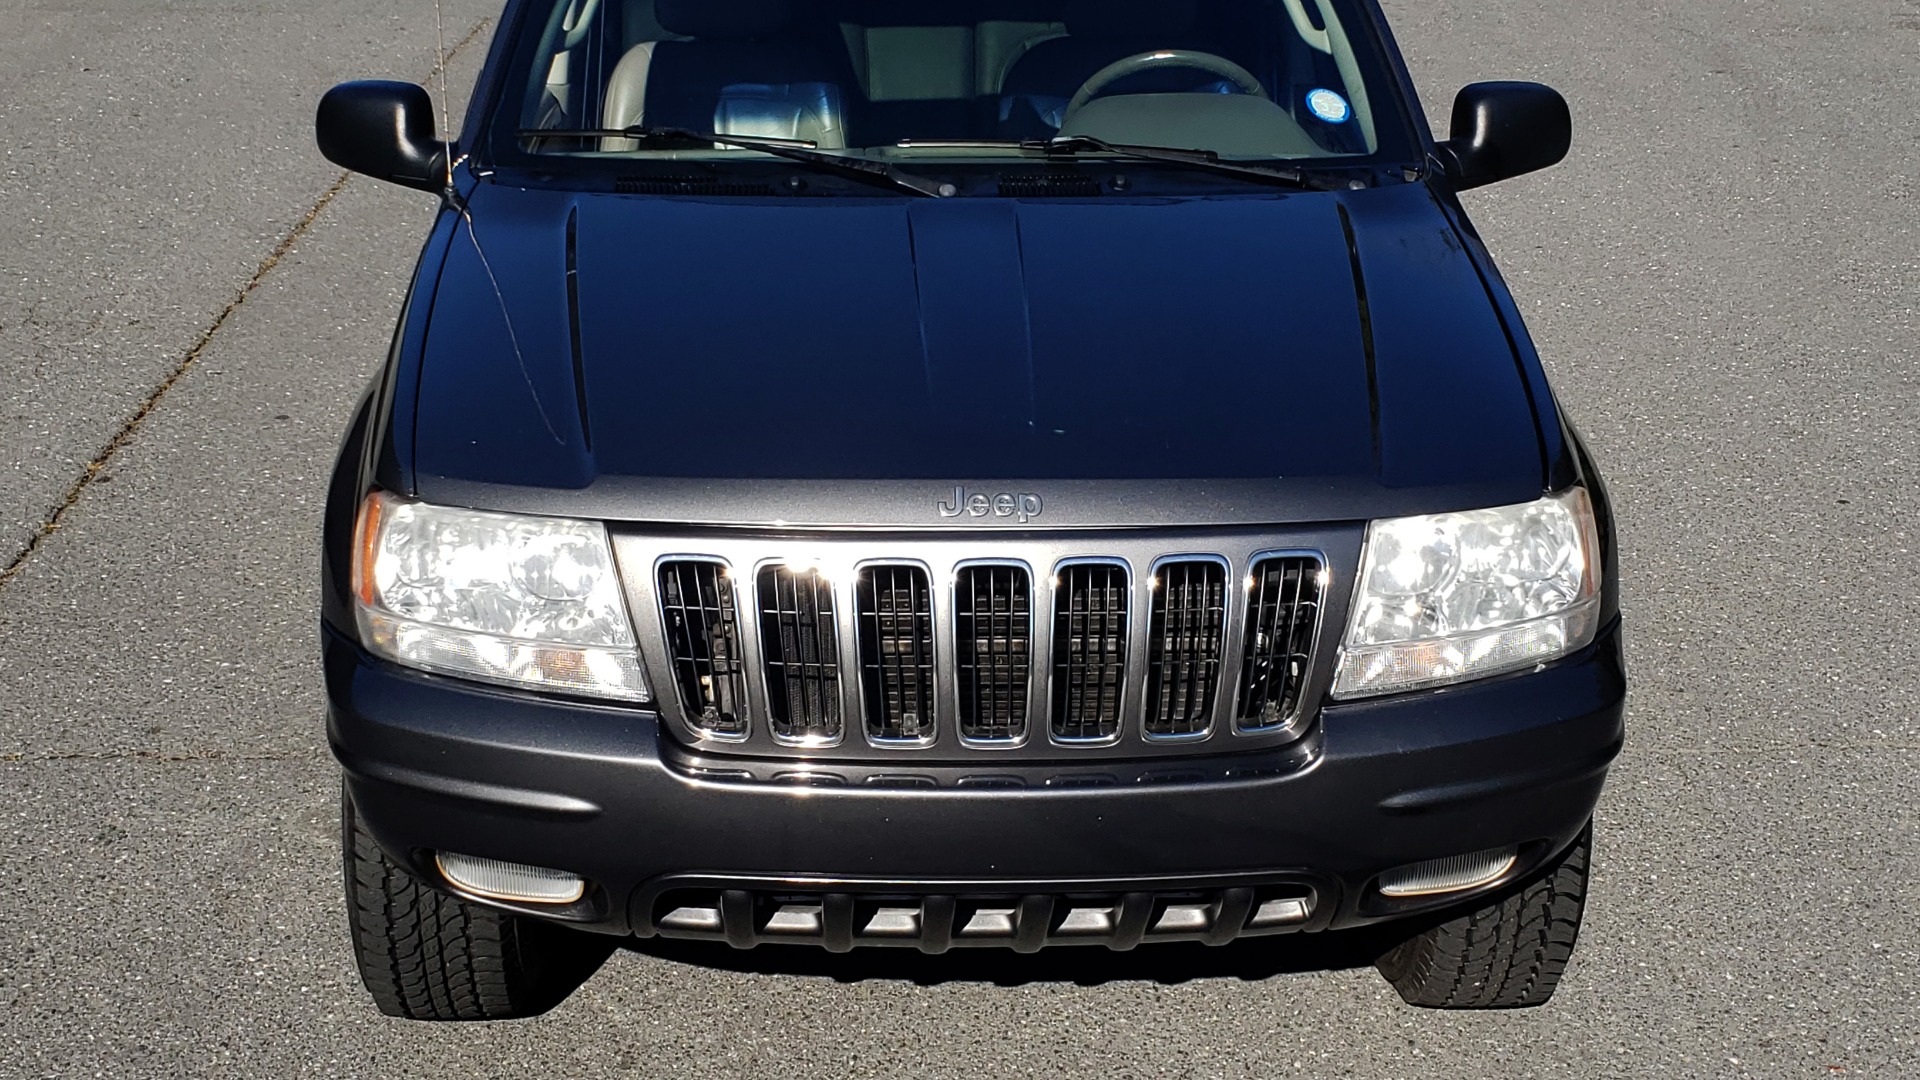 Used 2002 Jeep GRAND CHEROKEE LIMITED 4X4 / SUNROOF / 4.7L V8 / 5-SPD AUTO / CLD WTHR for sale Sold at Formula Imports in Charlotte NC 28227 27